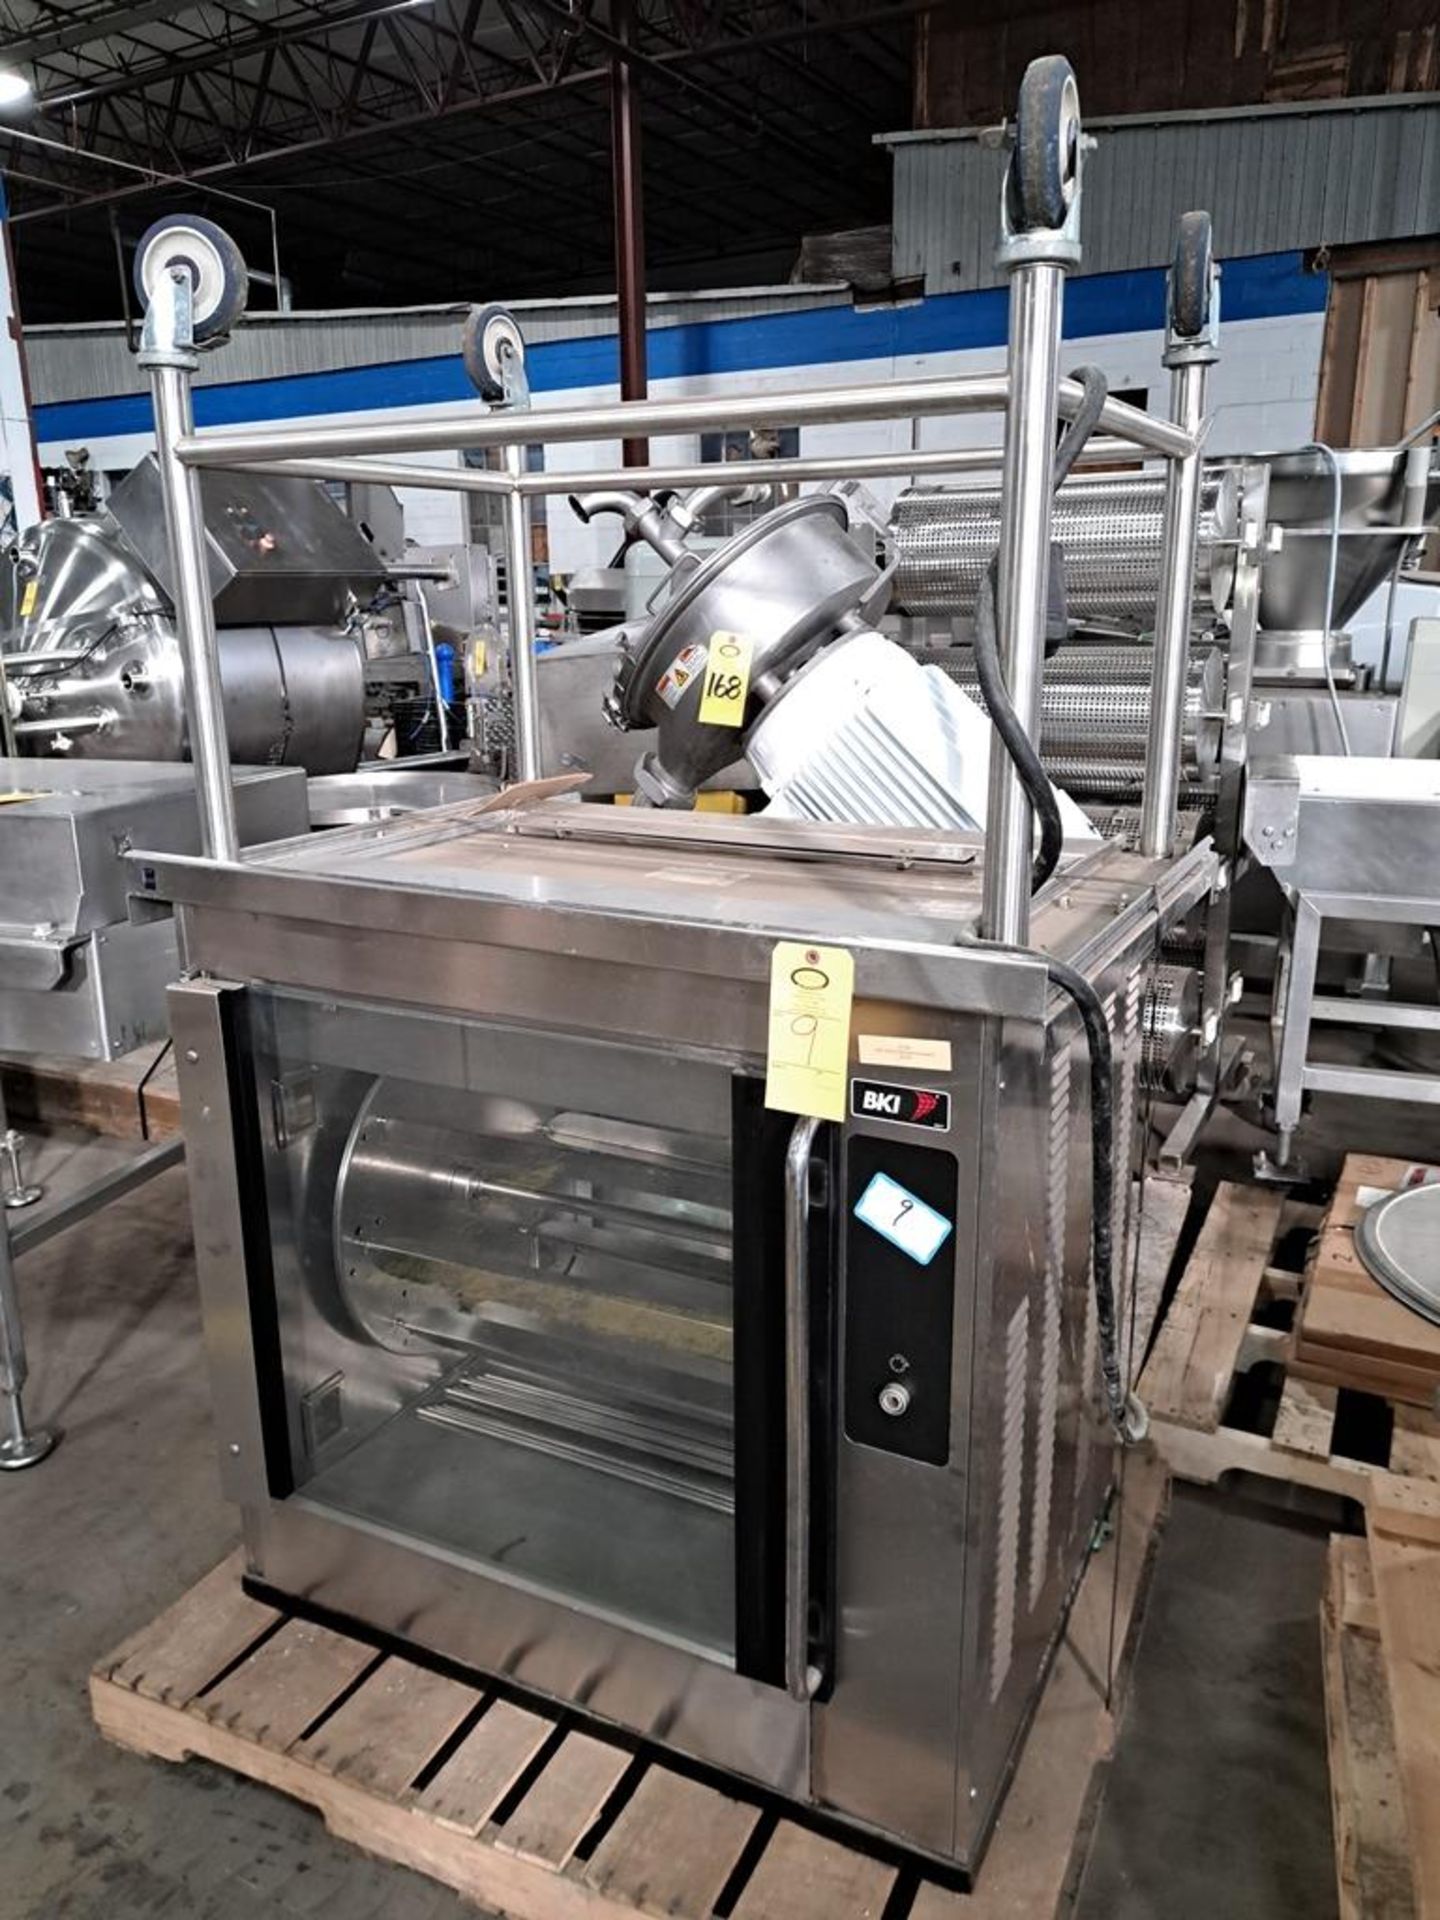 BKI Mdl. VGG-8 Electric 40-Bird Commercial Rotisserie Oven with stainless steel cart (Located in